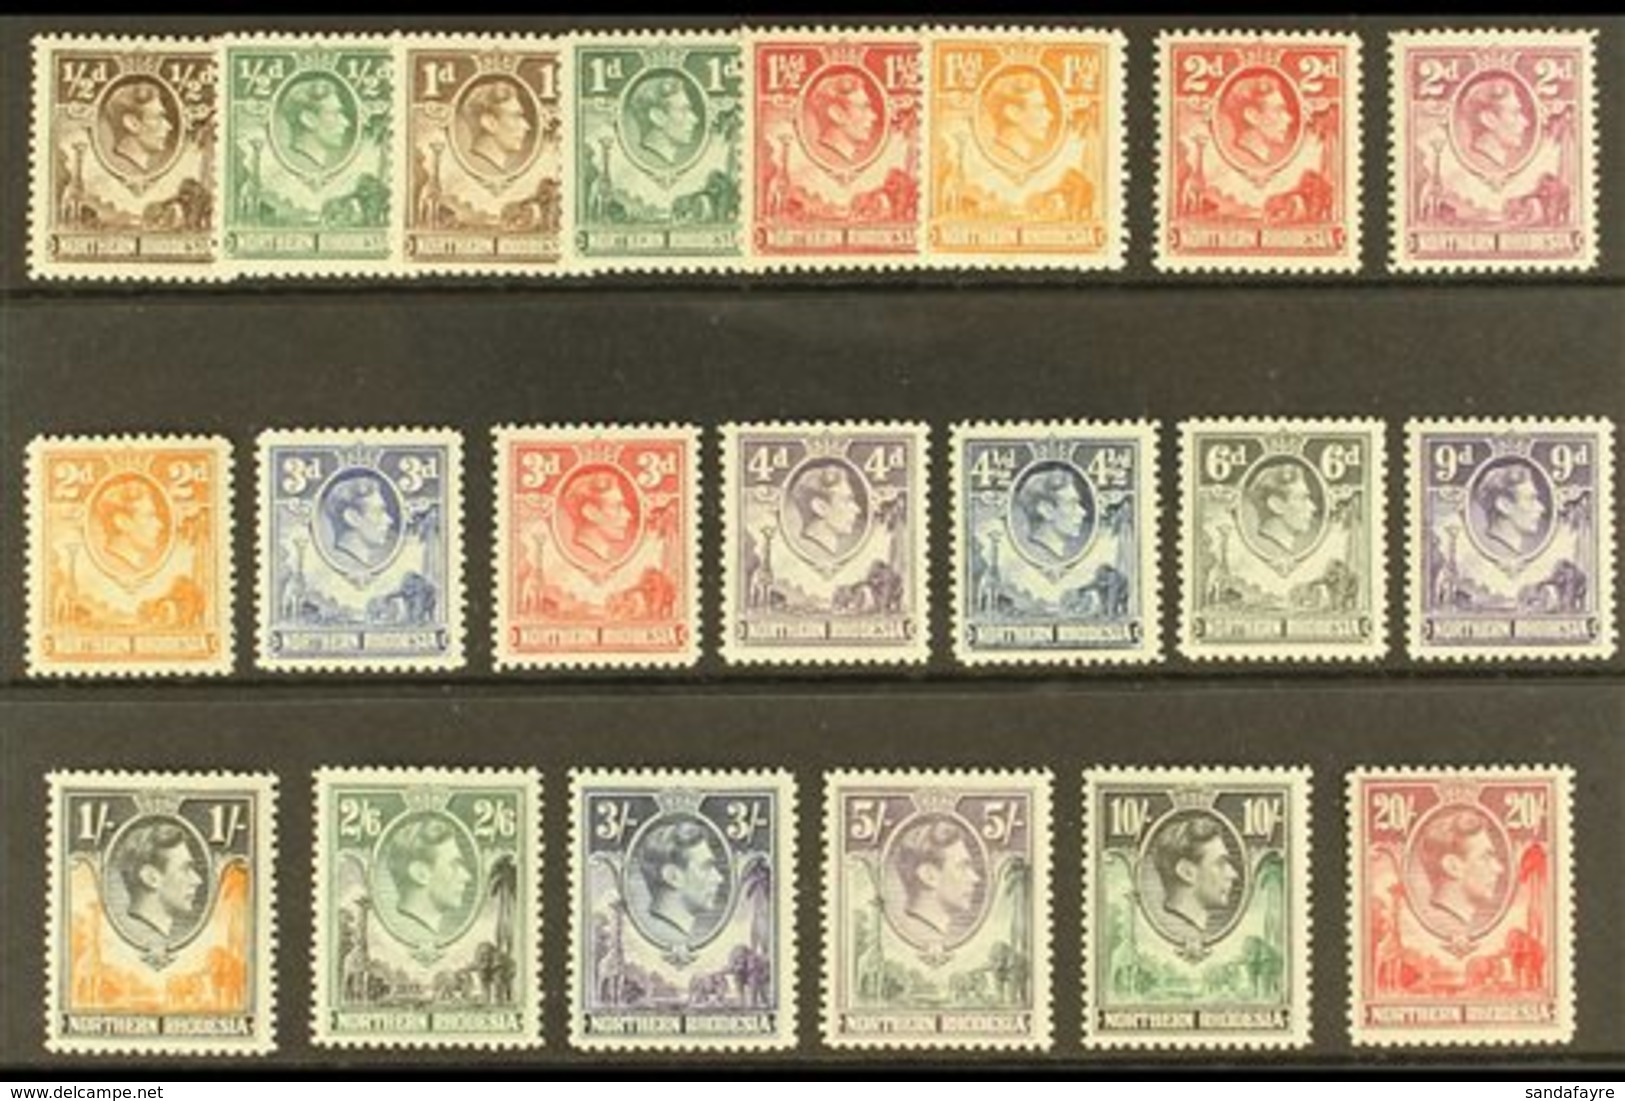 1938-52  Complete Definitive Set, SG 25/45, Fine Mint, All Stamps Except The 2d Yellow Brown Are NEVER HINGED MINT. (21  - Noord-Rhodesië (...-1963)